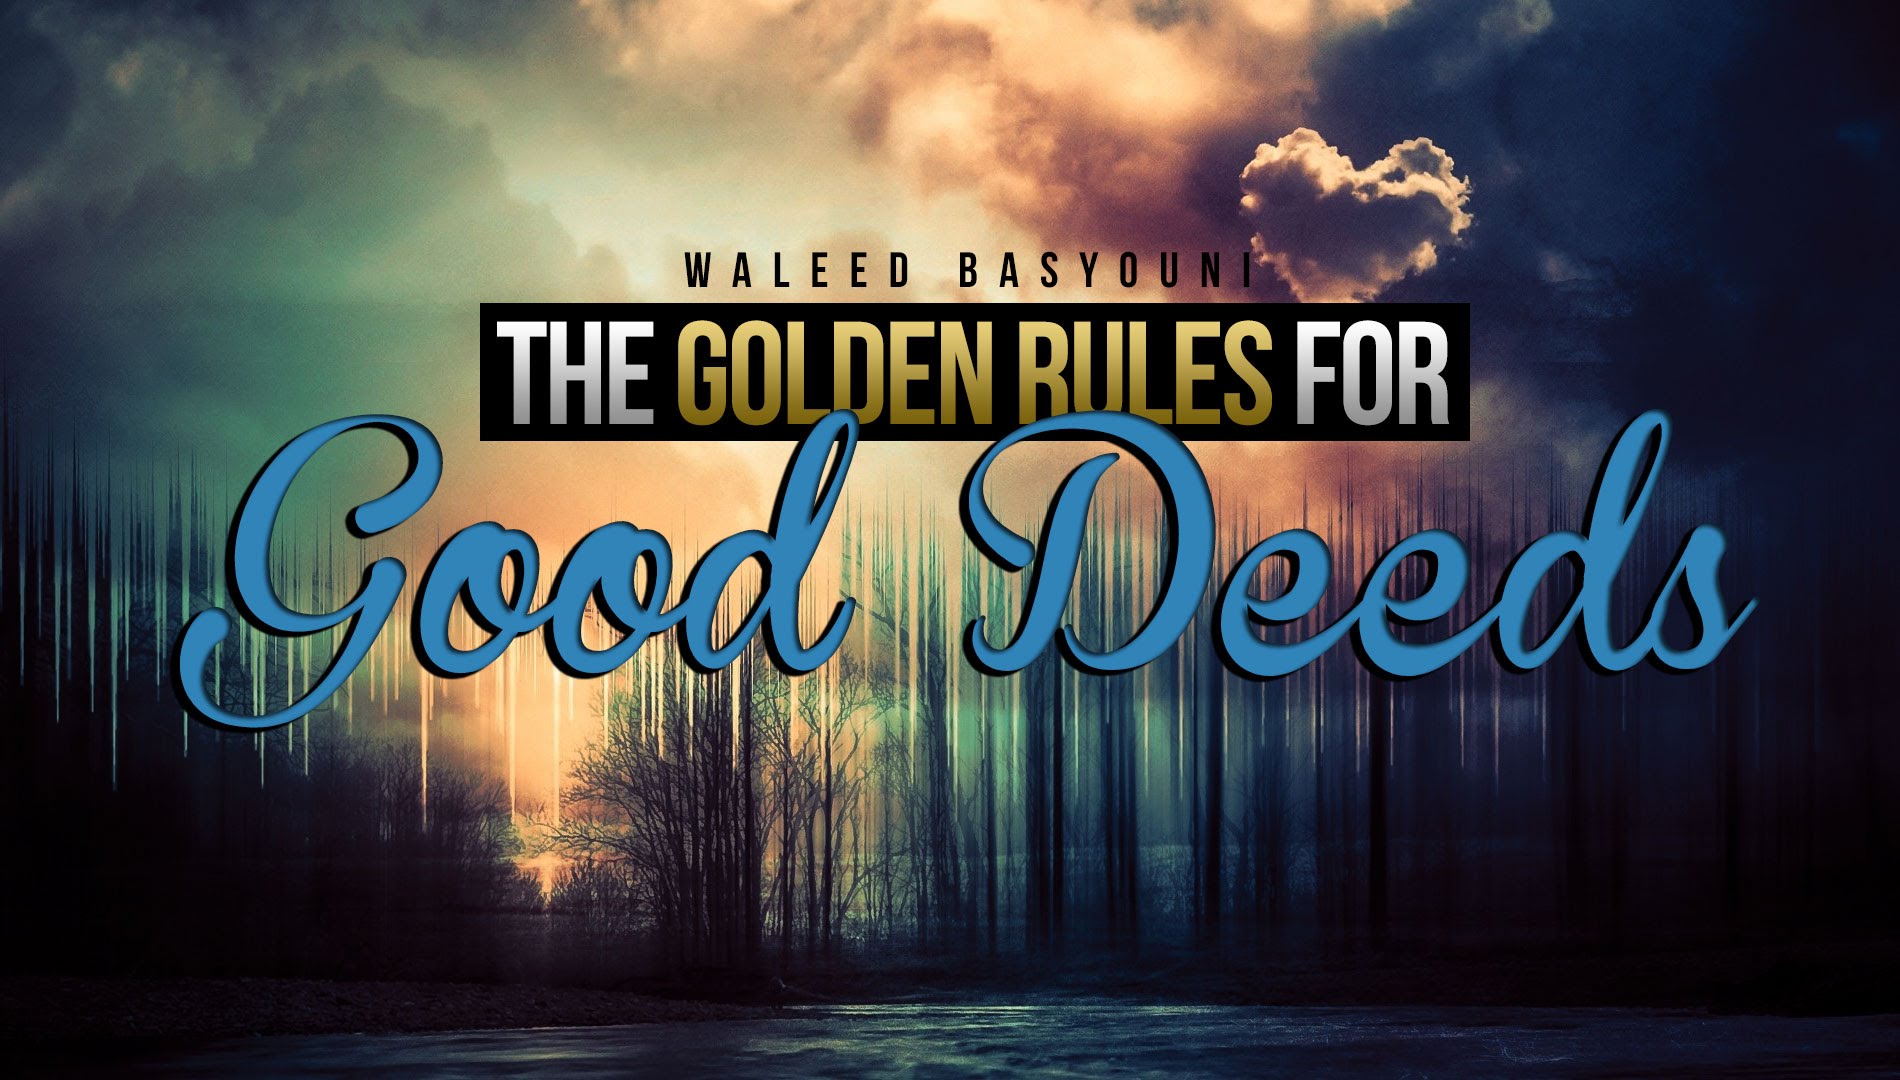 The Golden Rules For GOOD DEEDS - Waleed Basyouni